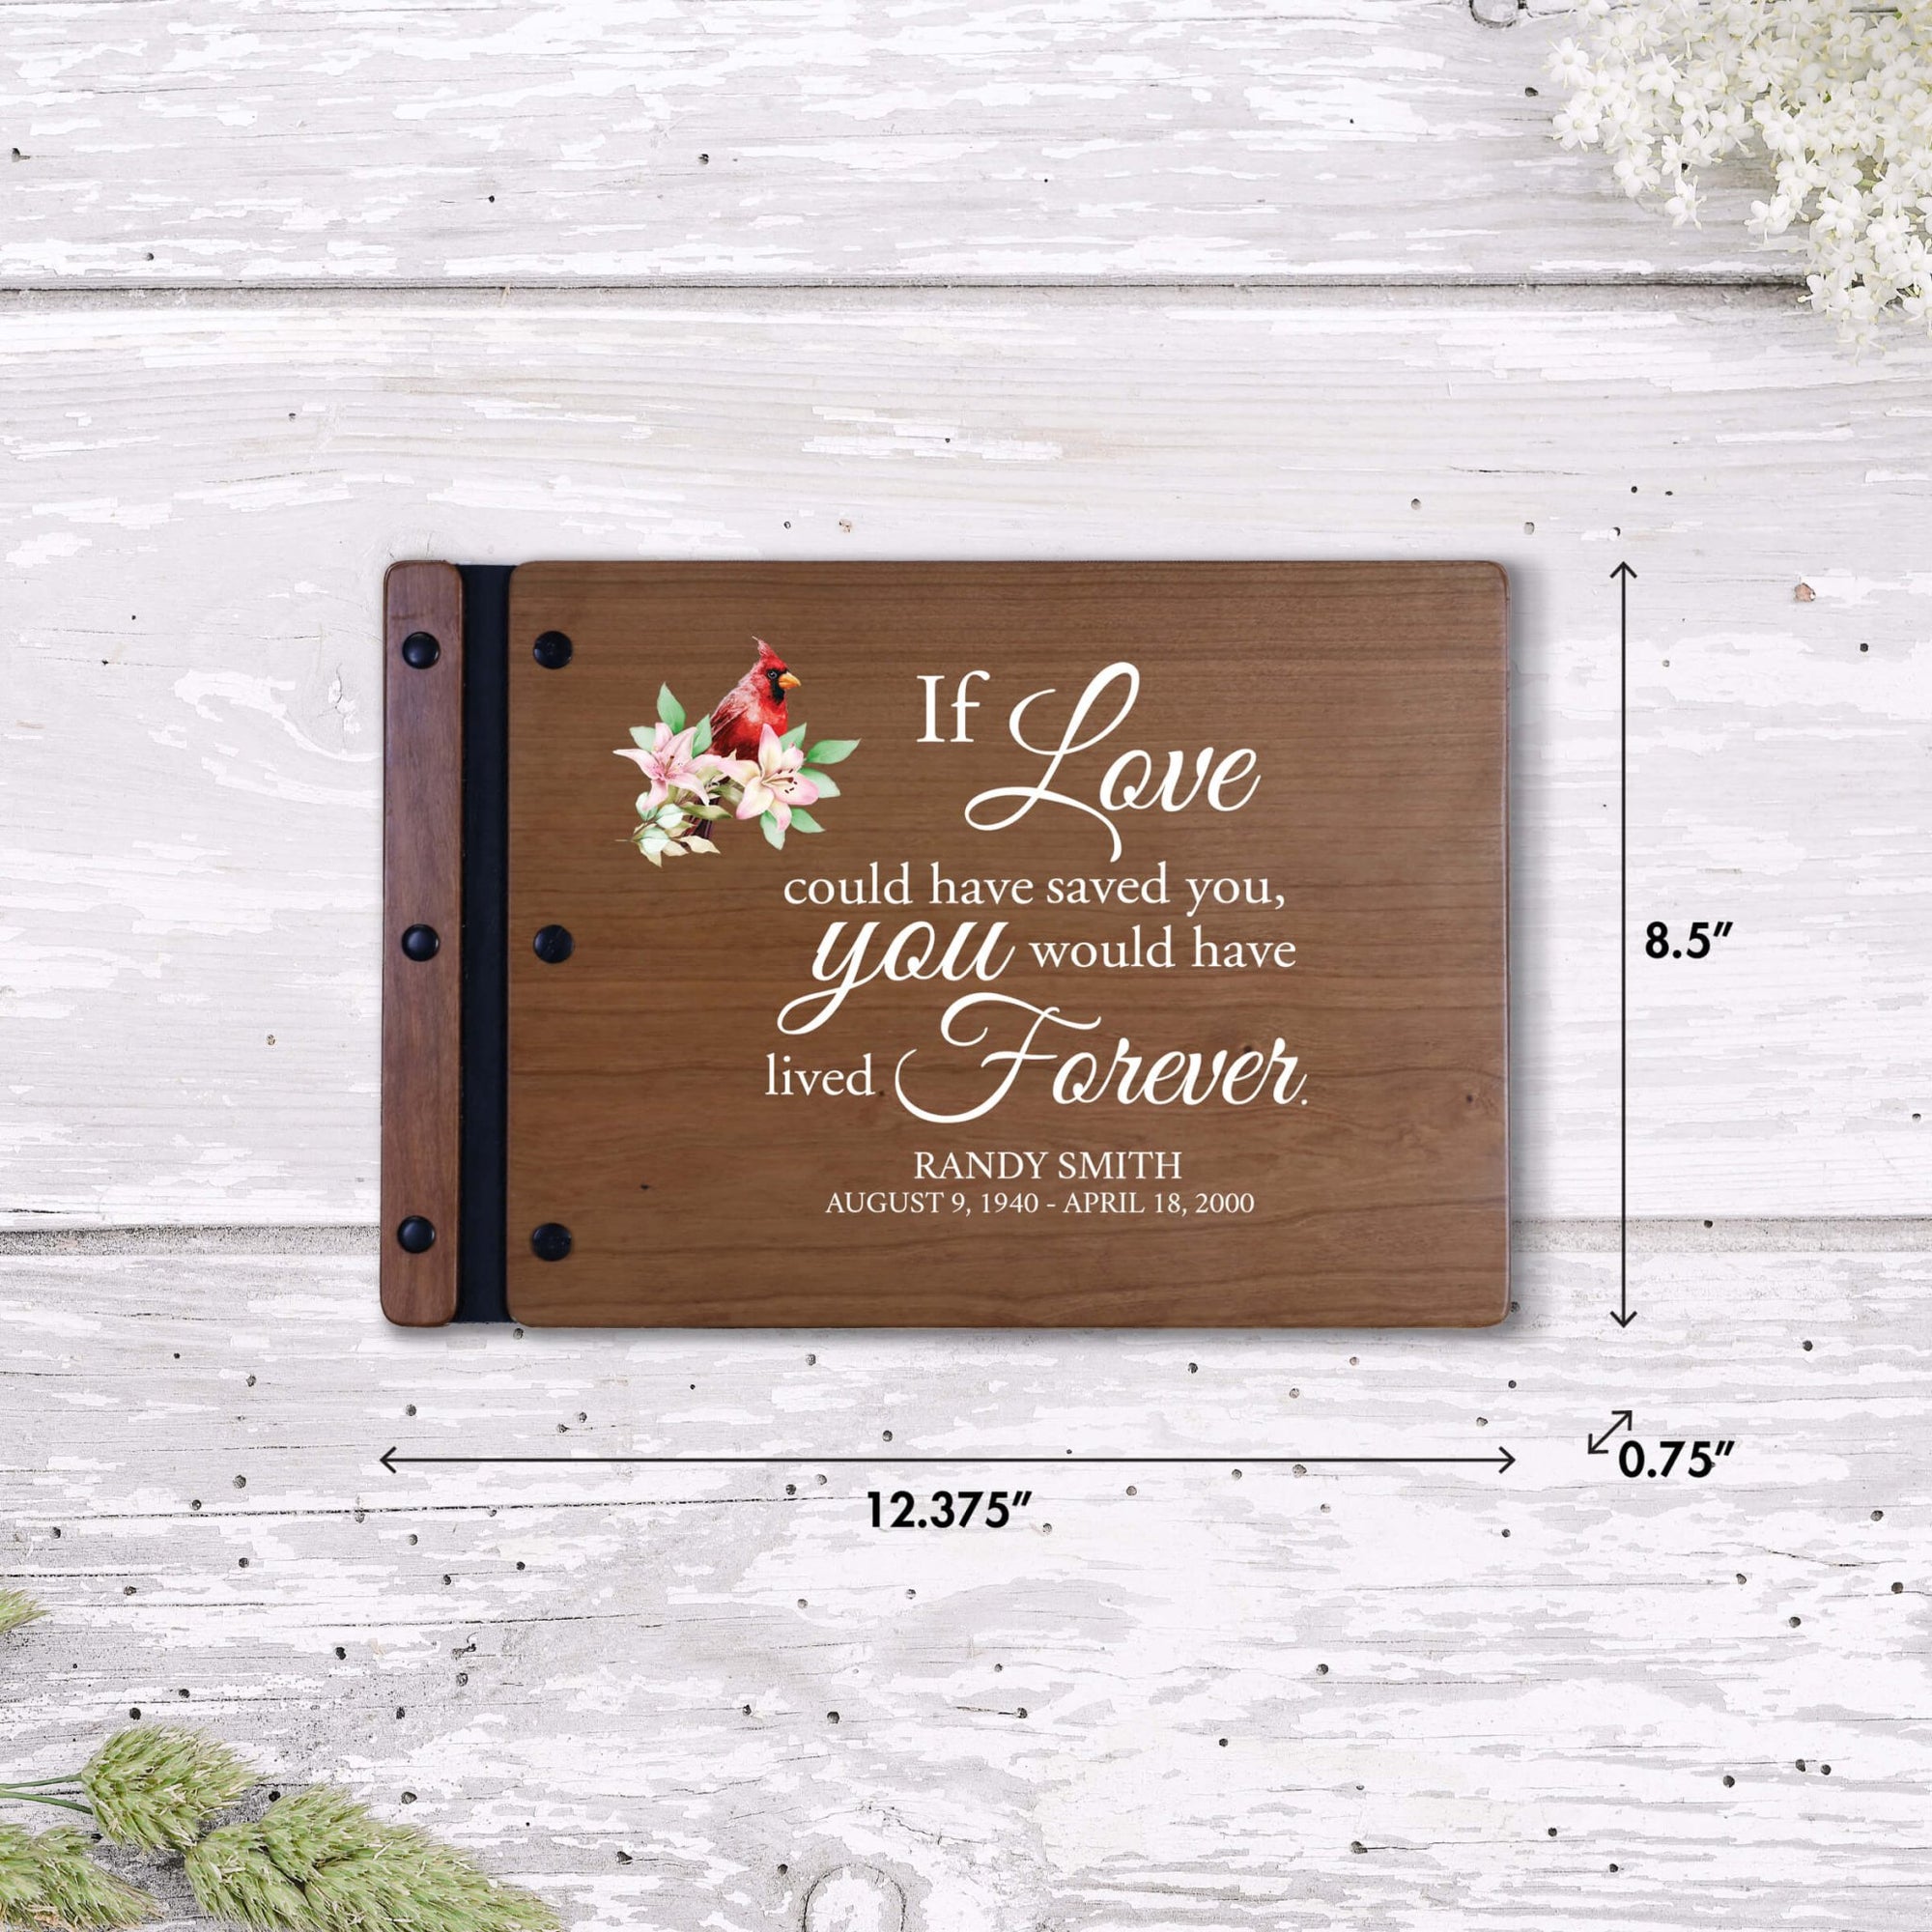 Personalized Funeral Wooden Guestbook for Memorial Service - If Love Could Have Saved - LifeSong Milestones